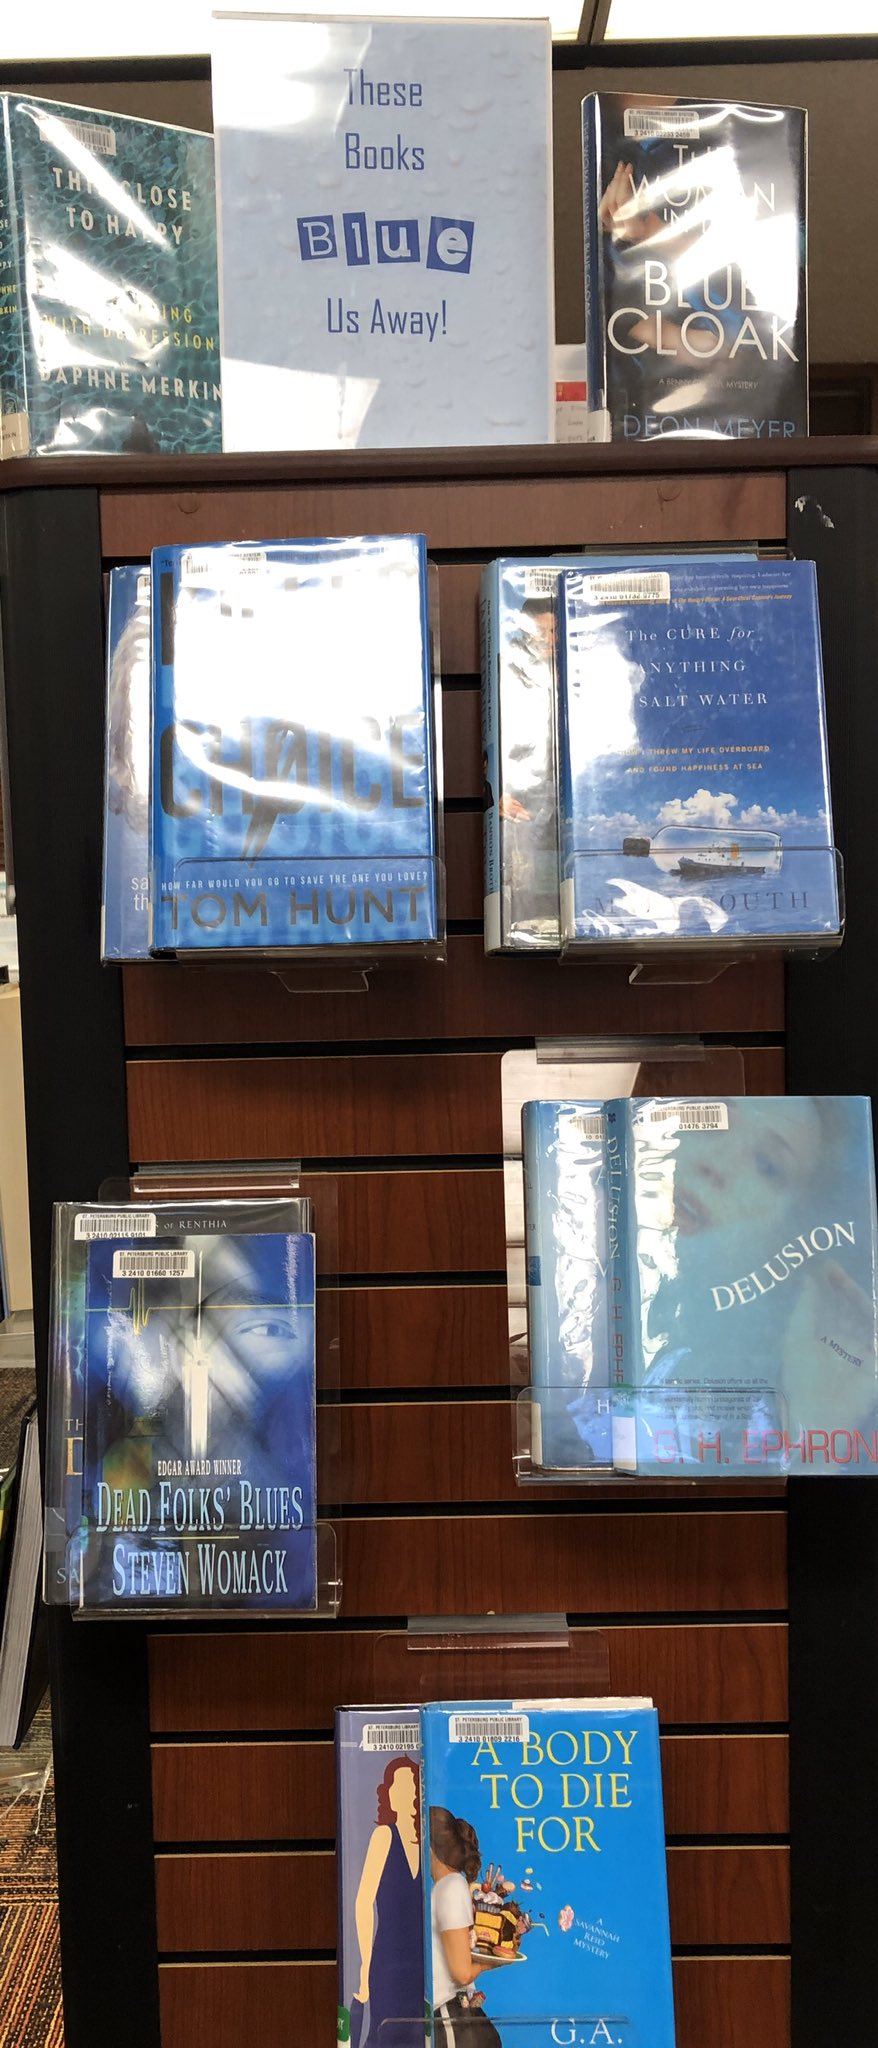 Display of books with blue titles